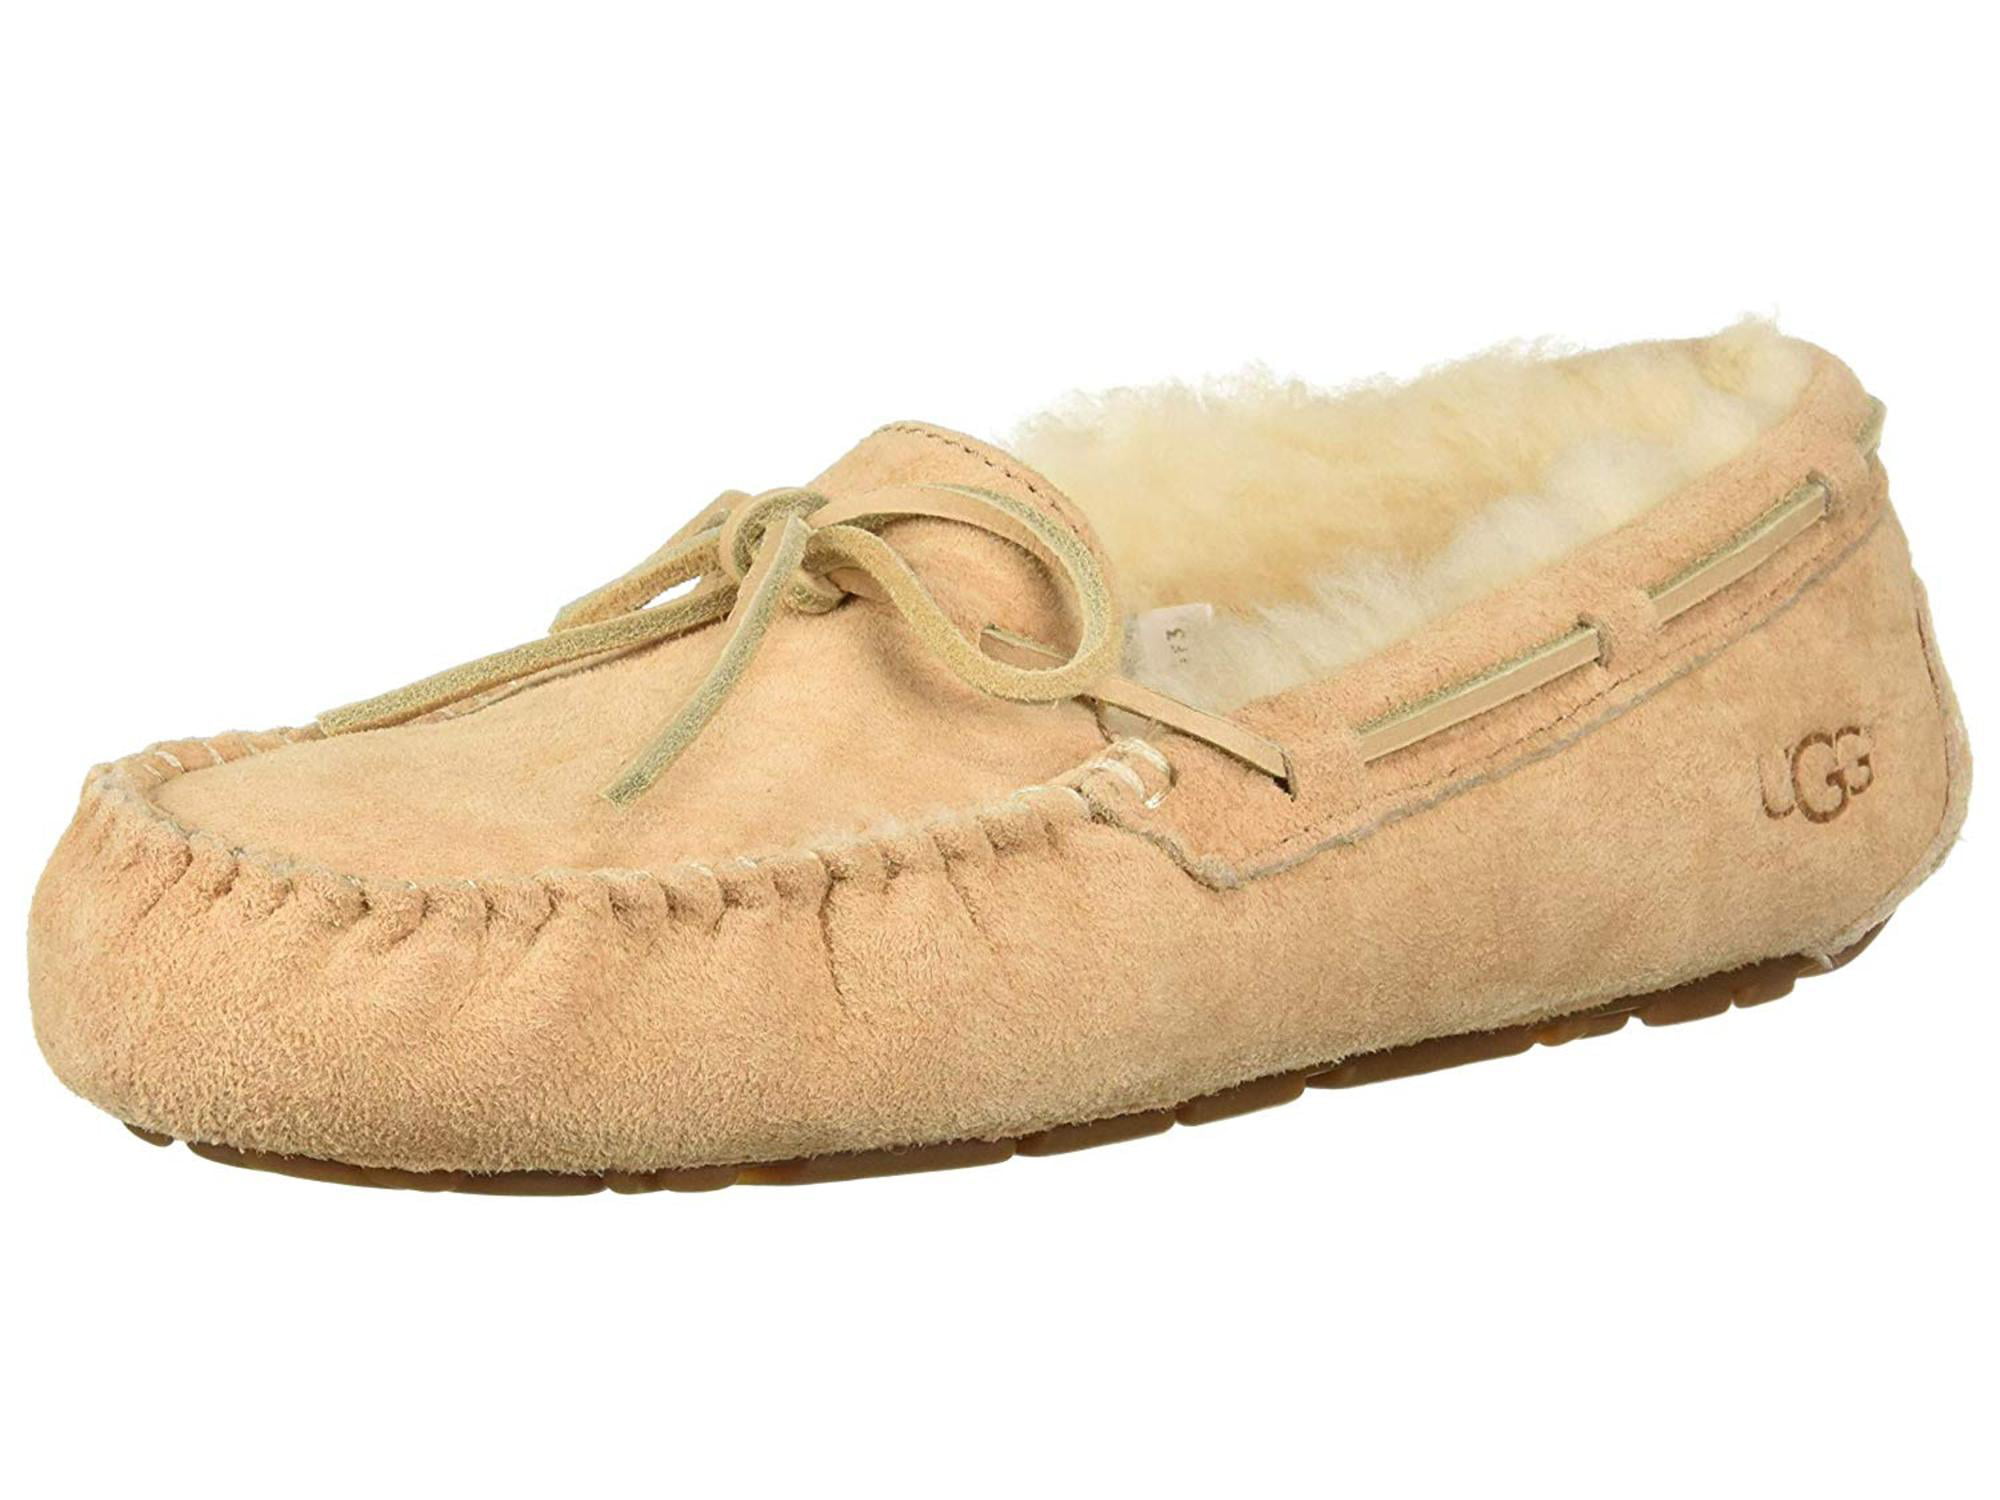 uggs slippers canada